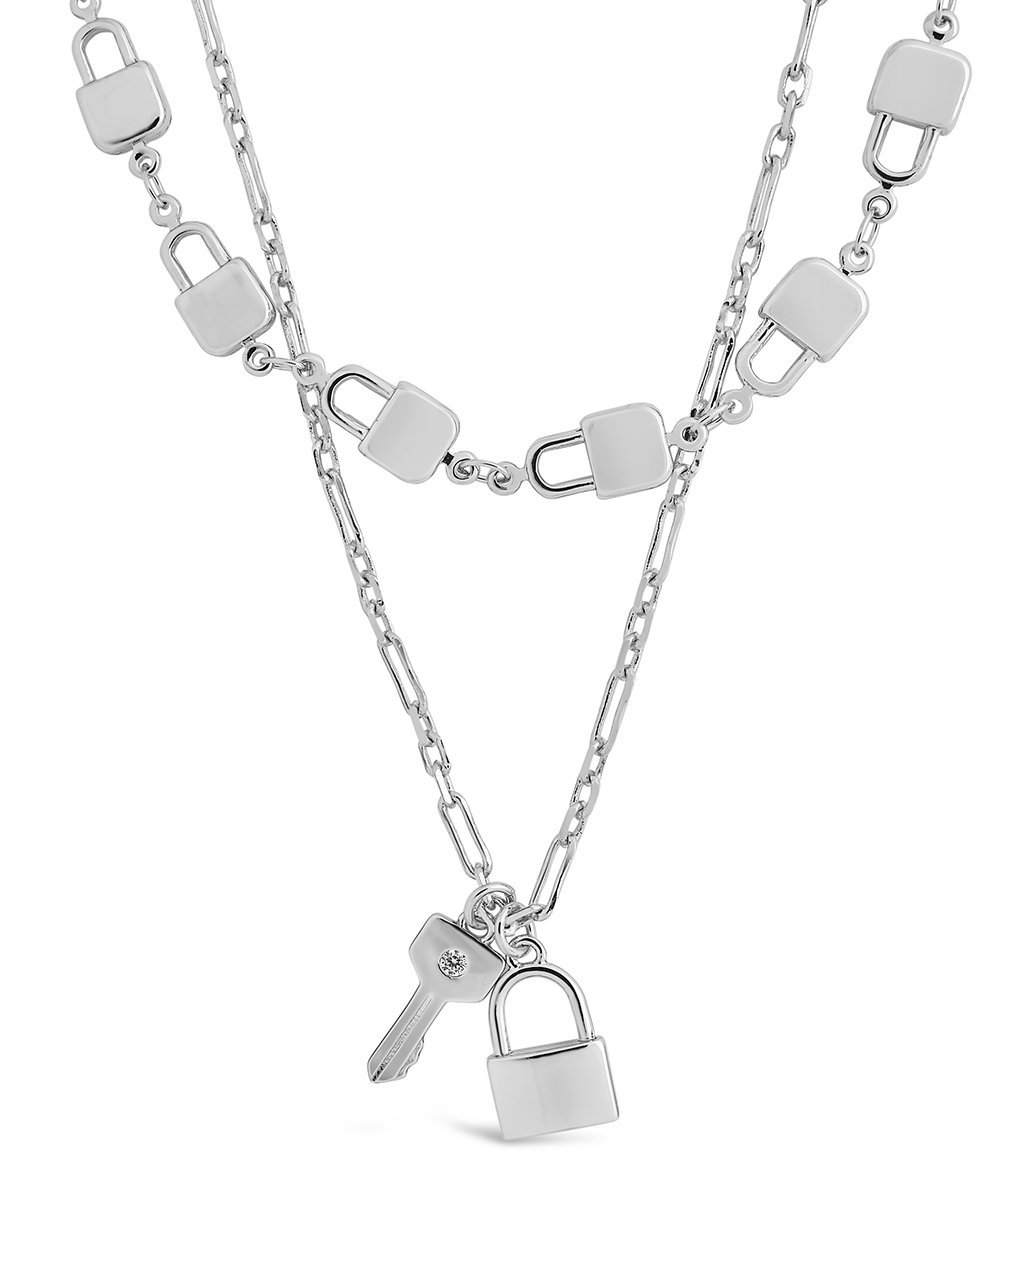 Lock & Key Layered Necklace Necklace Sterling Forever Silver